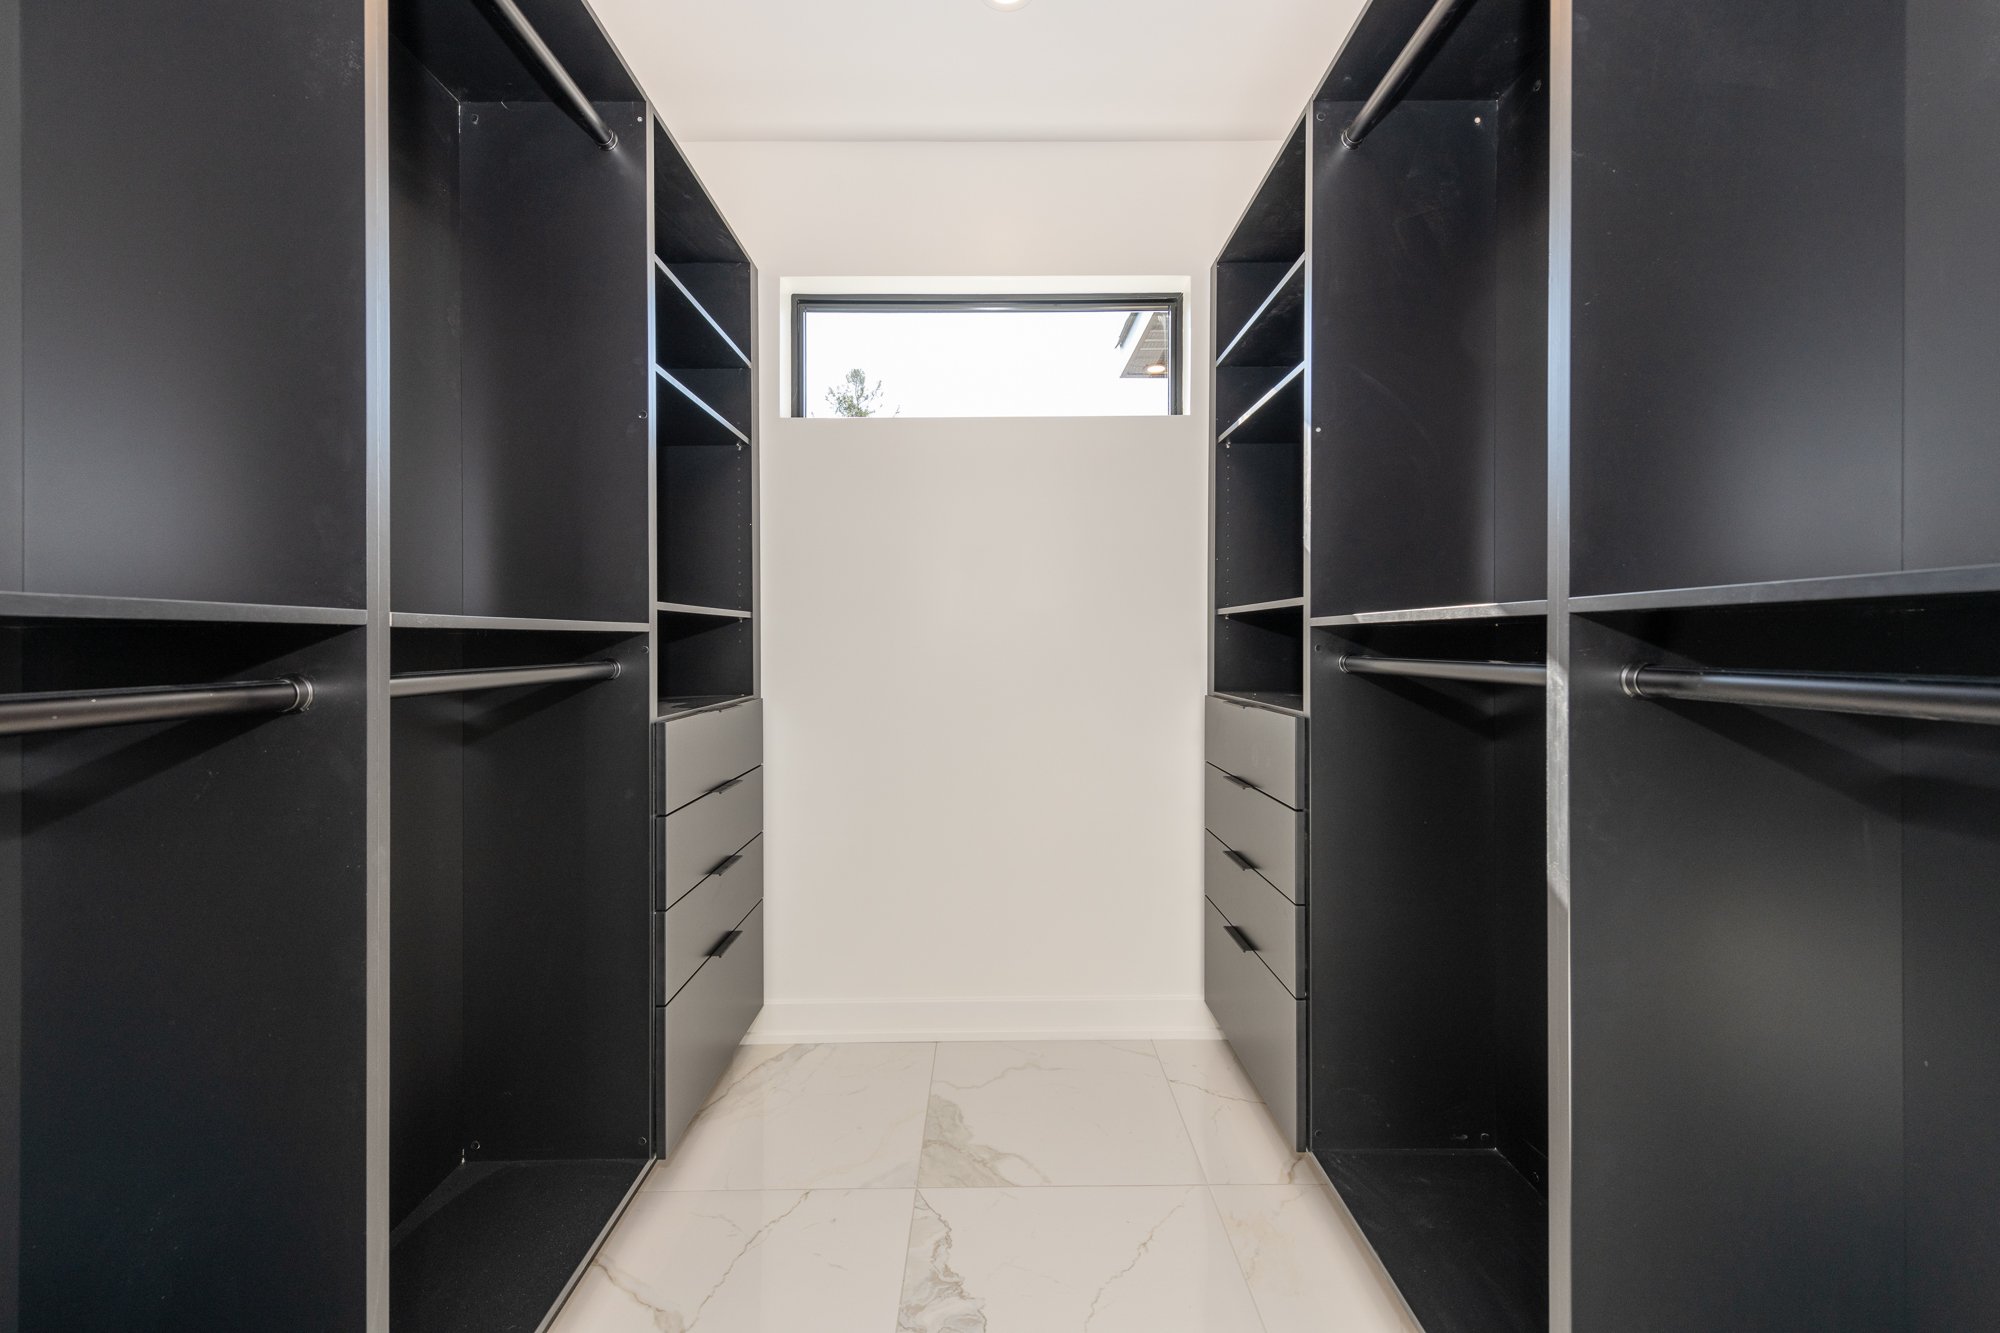 A customized master closet by Deslaurier.